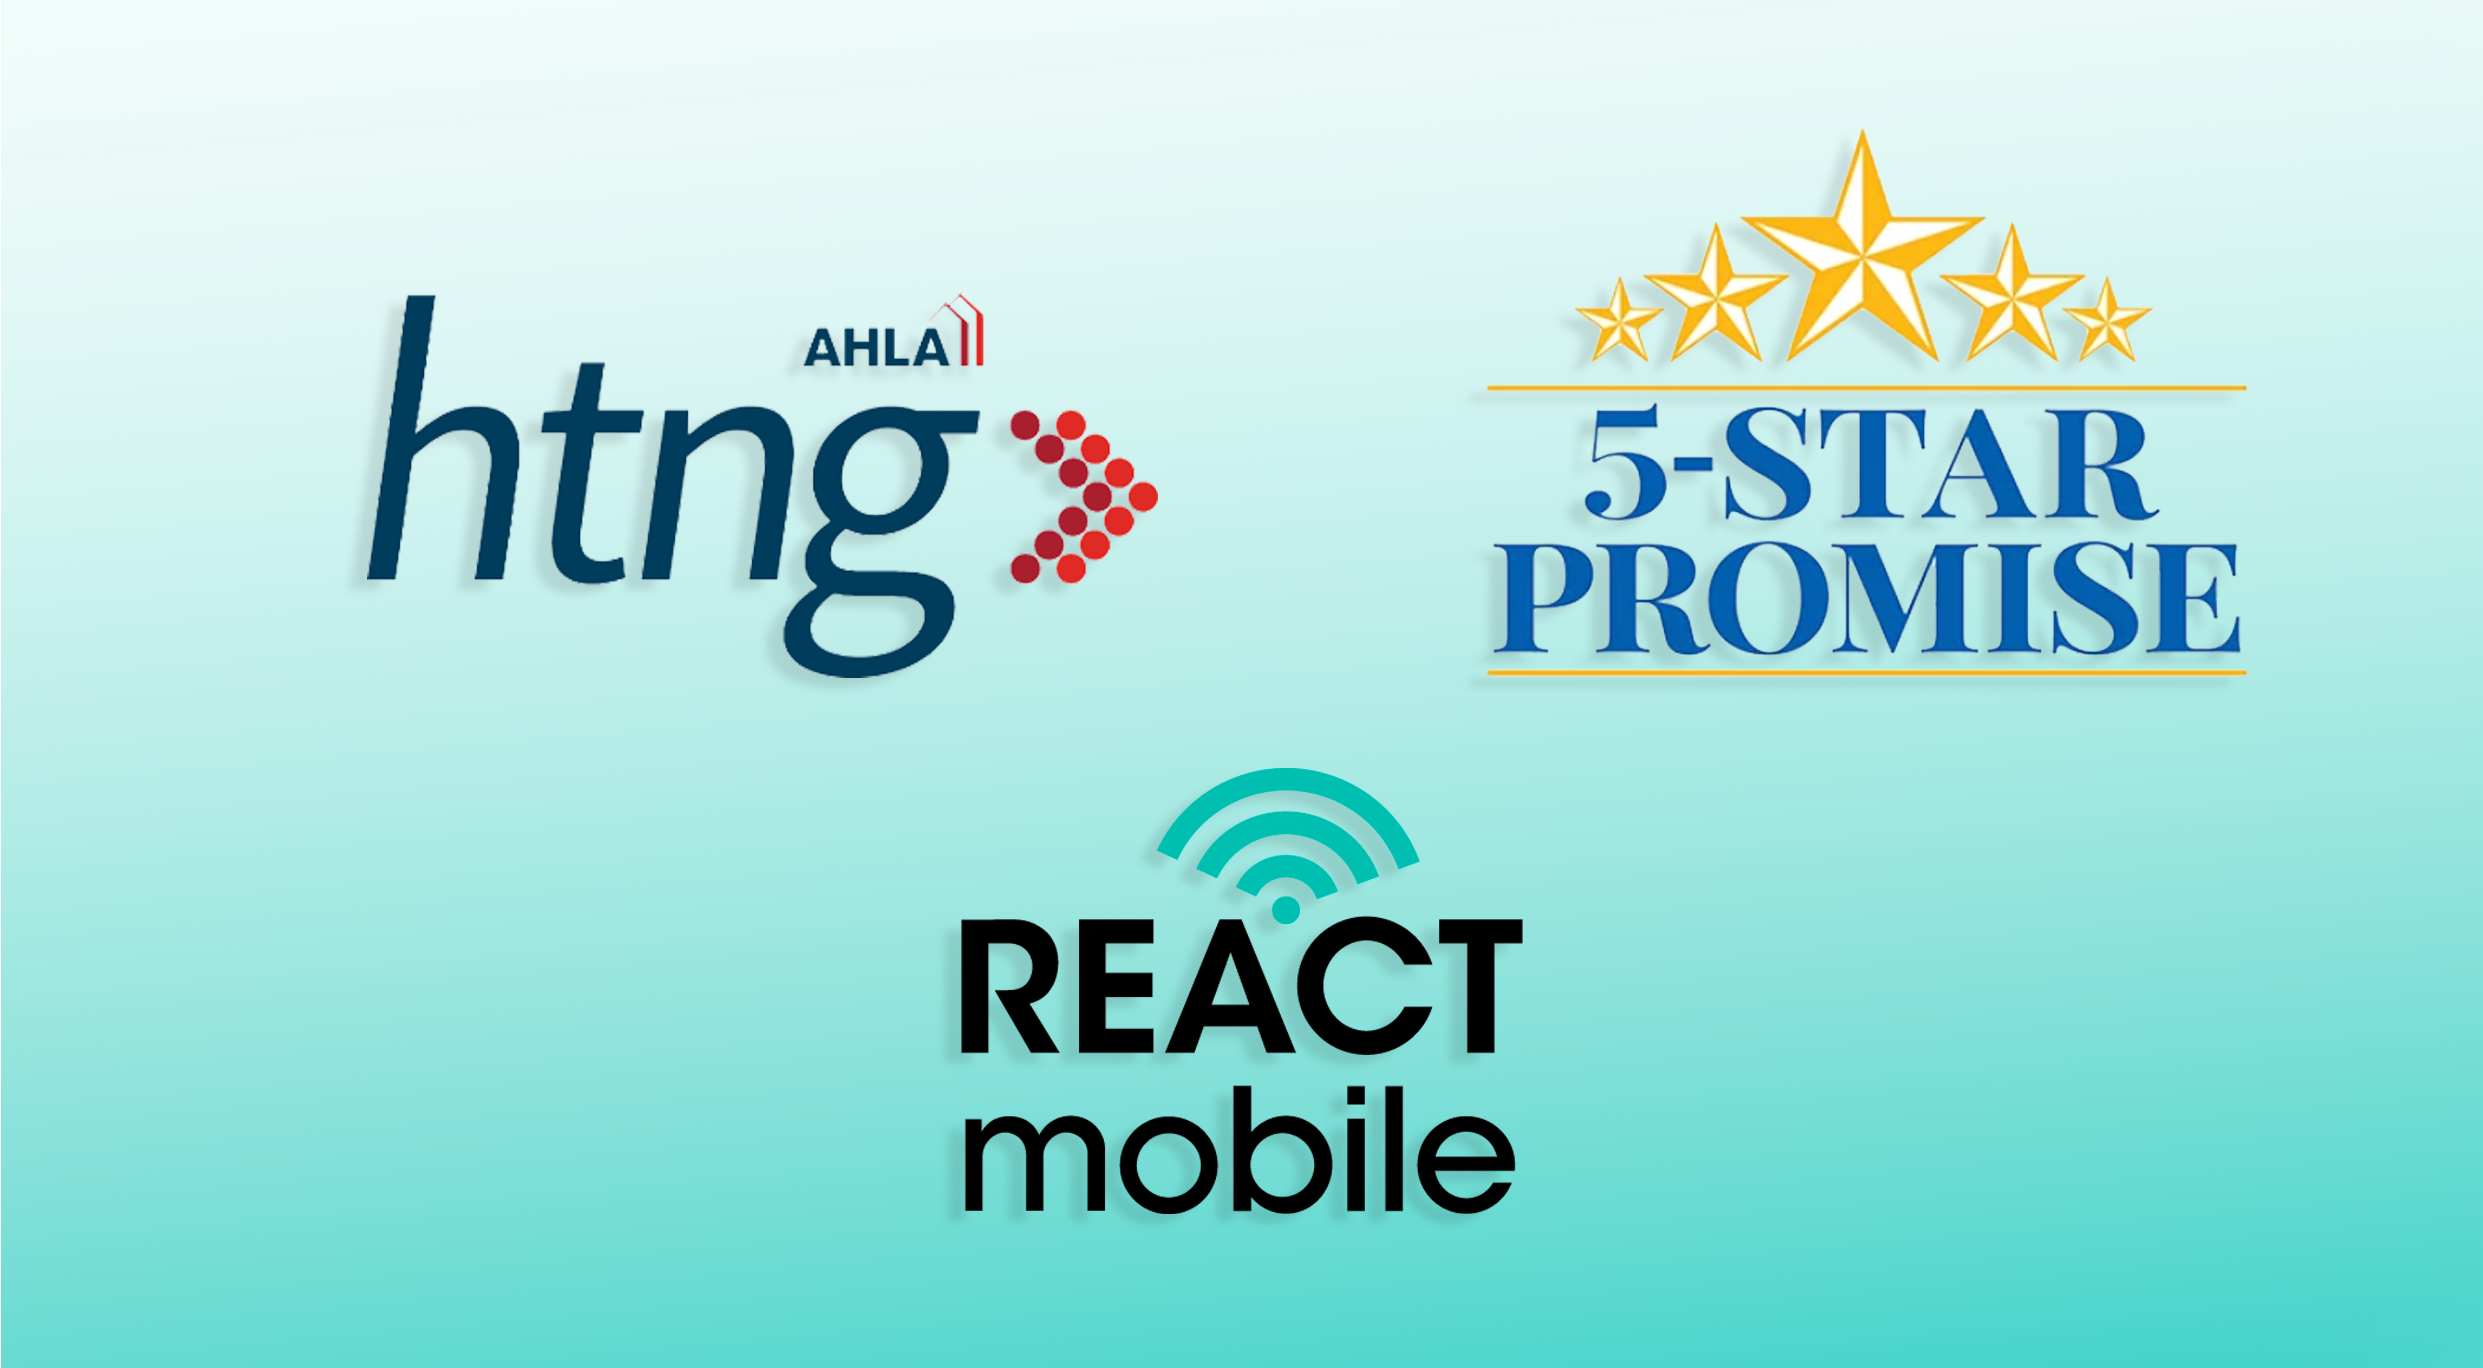 React Mobile Named Participant in AHLA-HTNG Staff Alert II Workgroup